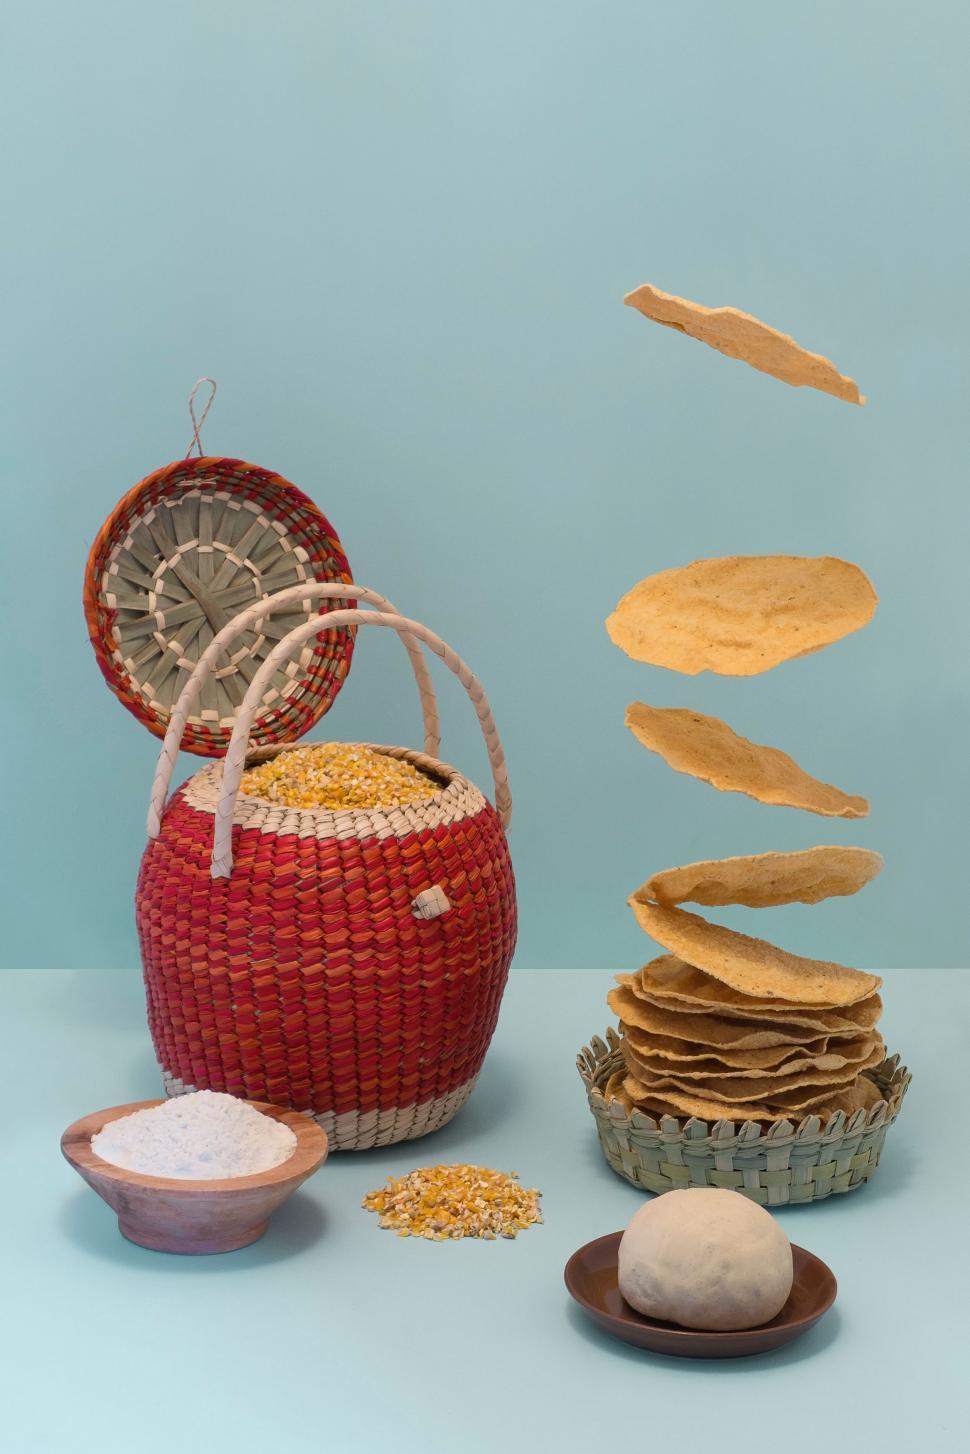 Free Image of Basket Overflowing With Food 